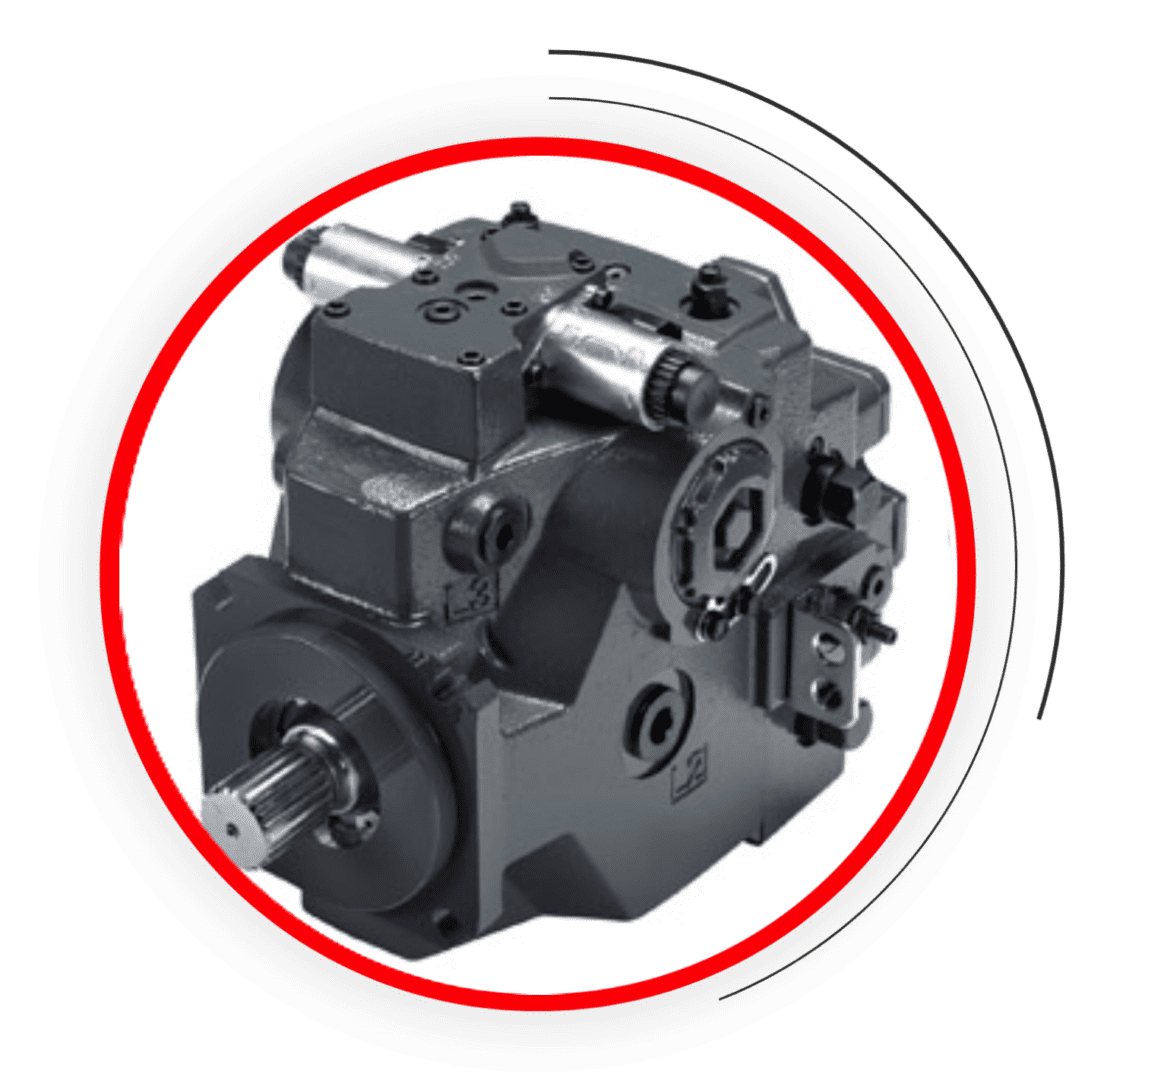 A picture of the gear pump for a machine.